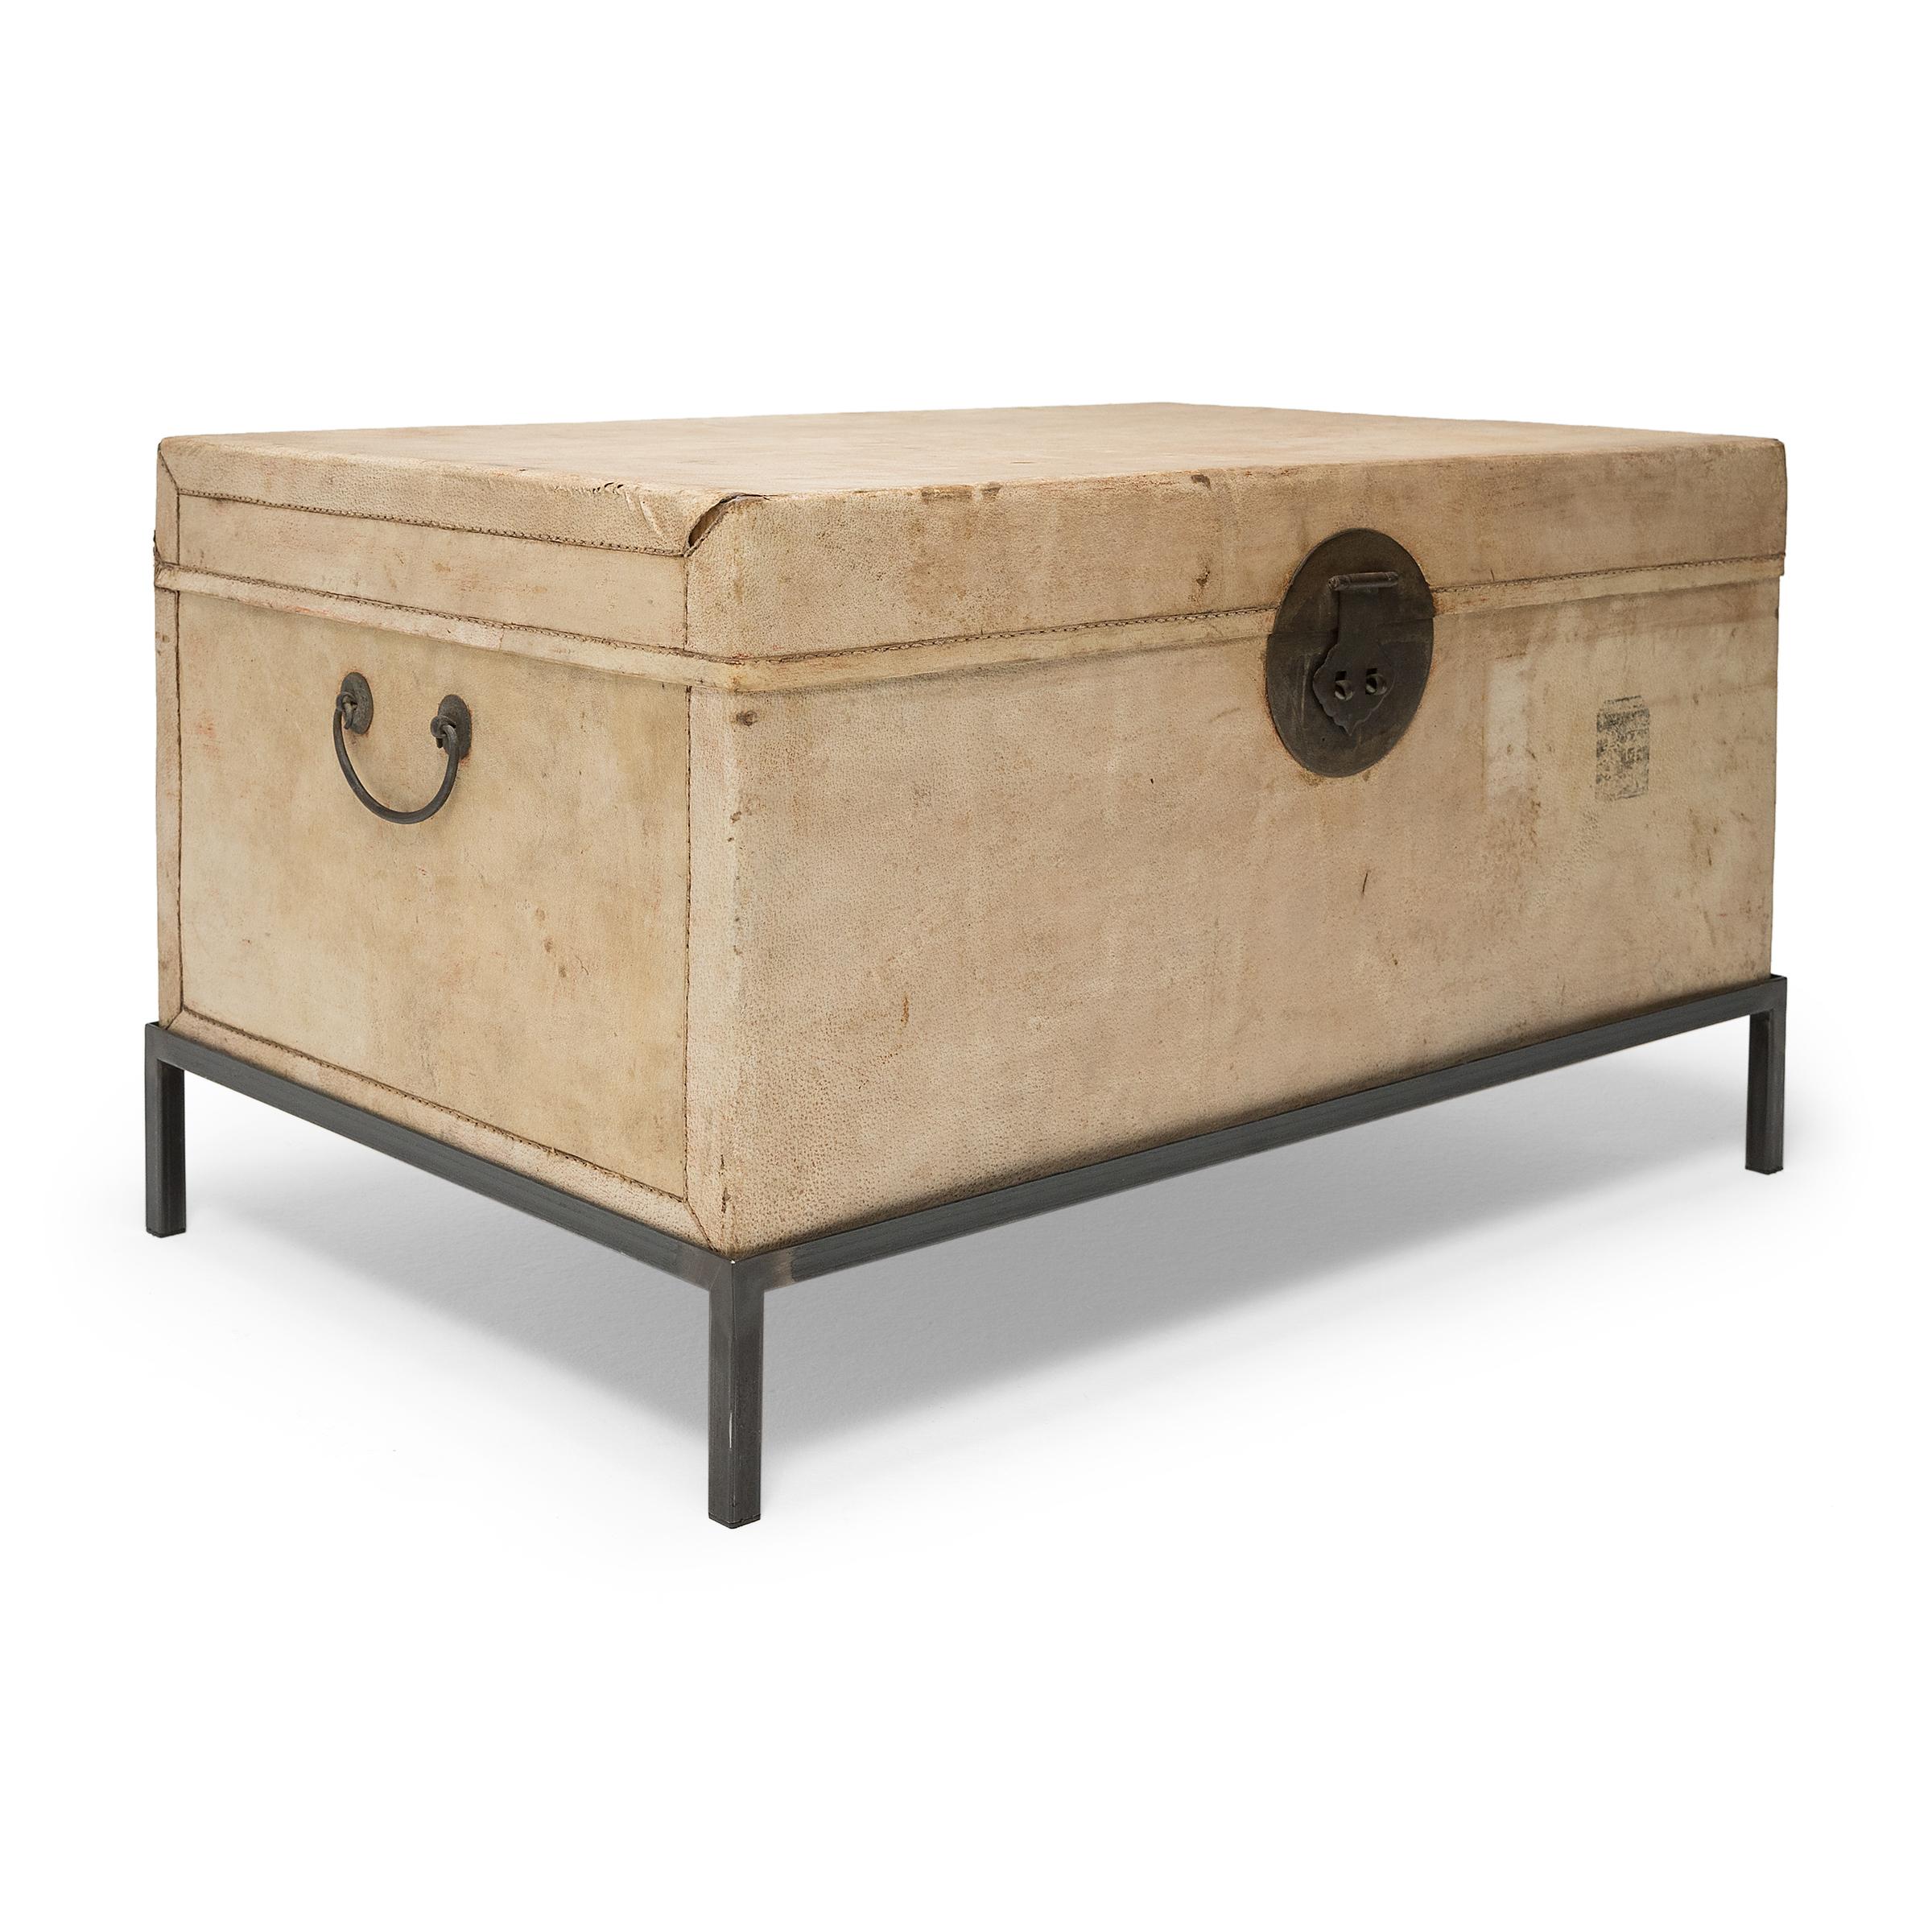 Blonde Chinese Hide Trunk Table, circa 1800 In Good Condition For Sale In Chicago, IL